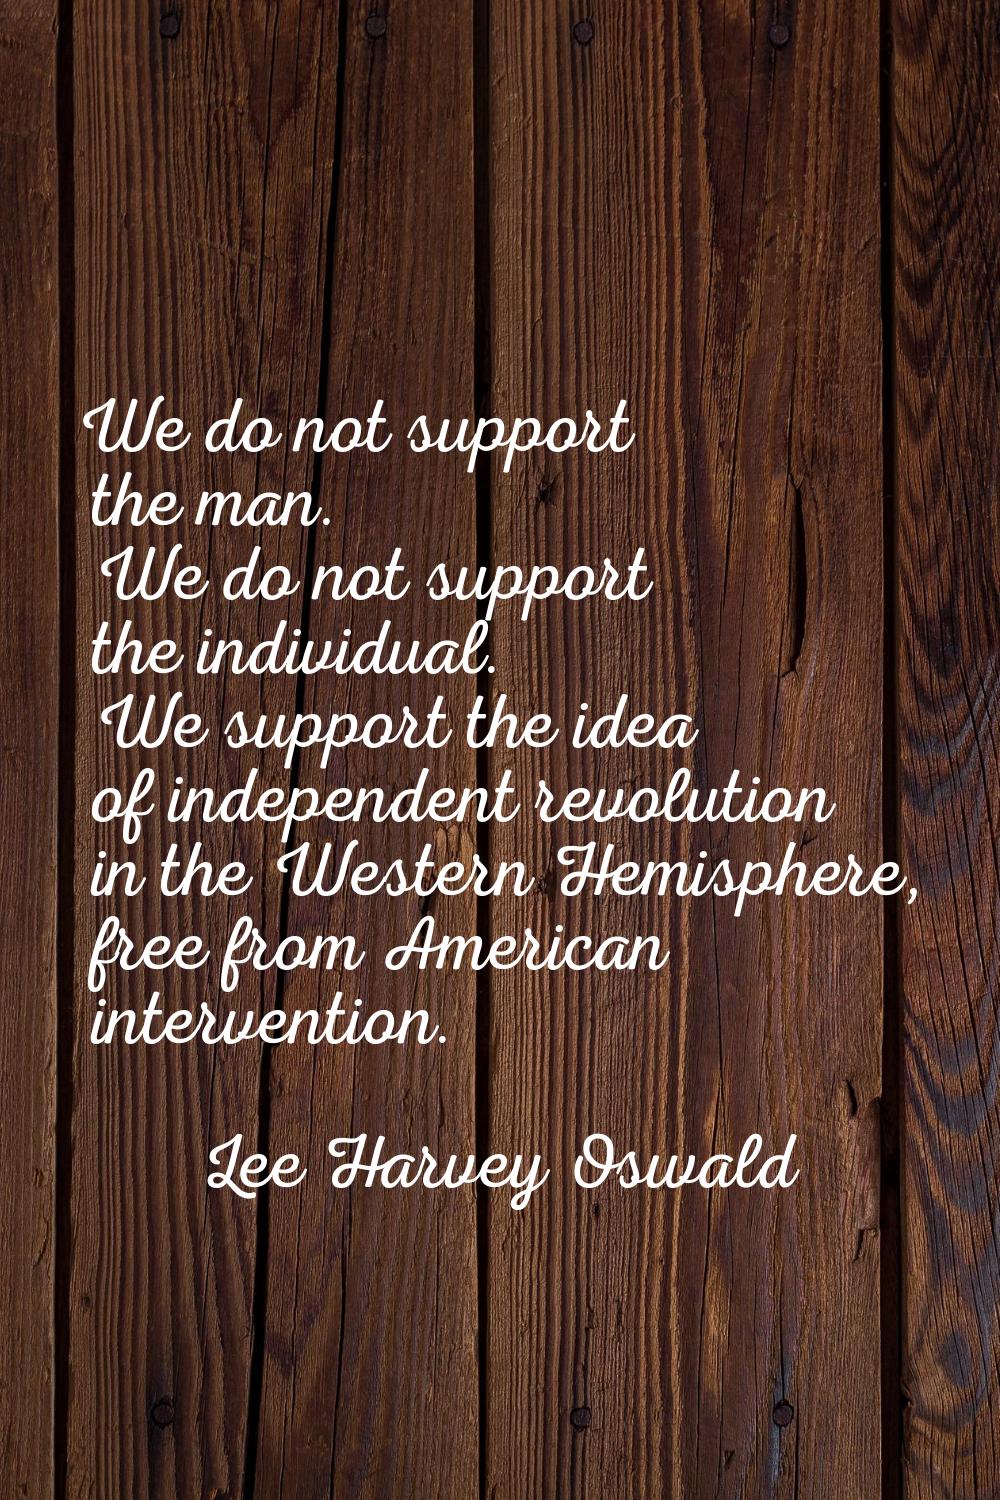 We do not support the man. We do not support the individual. We support the idea of independent rev